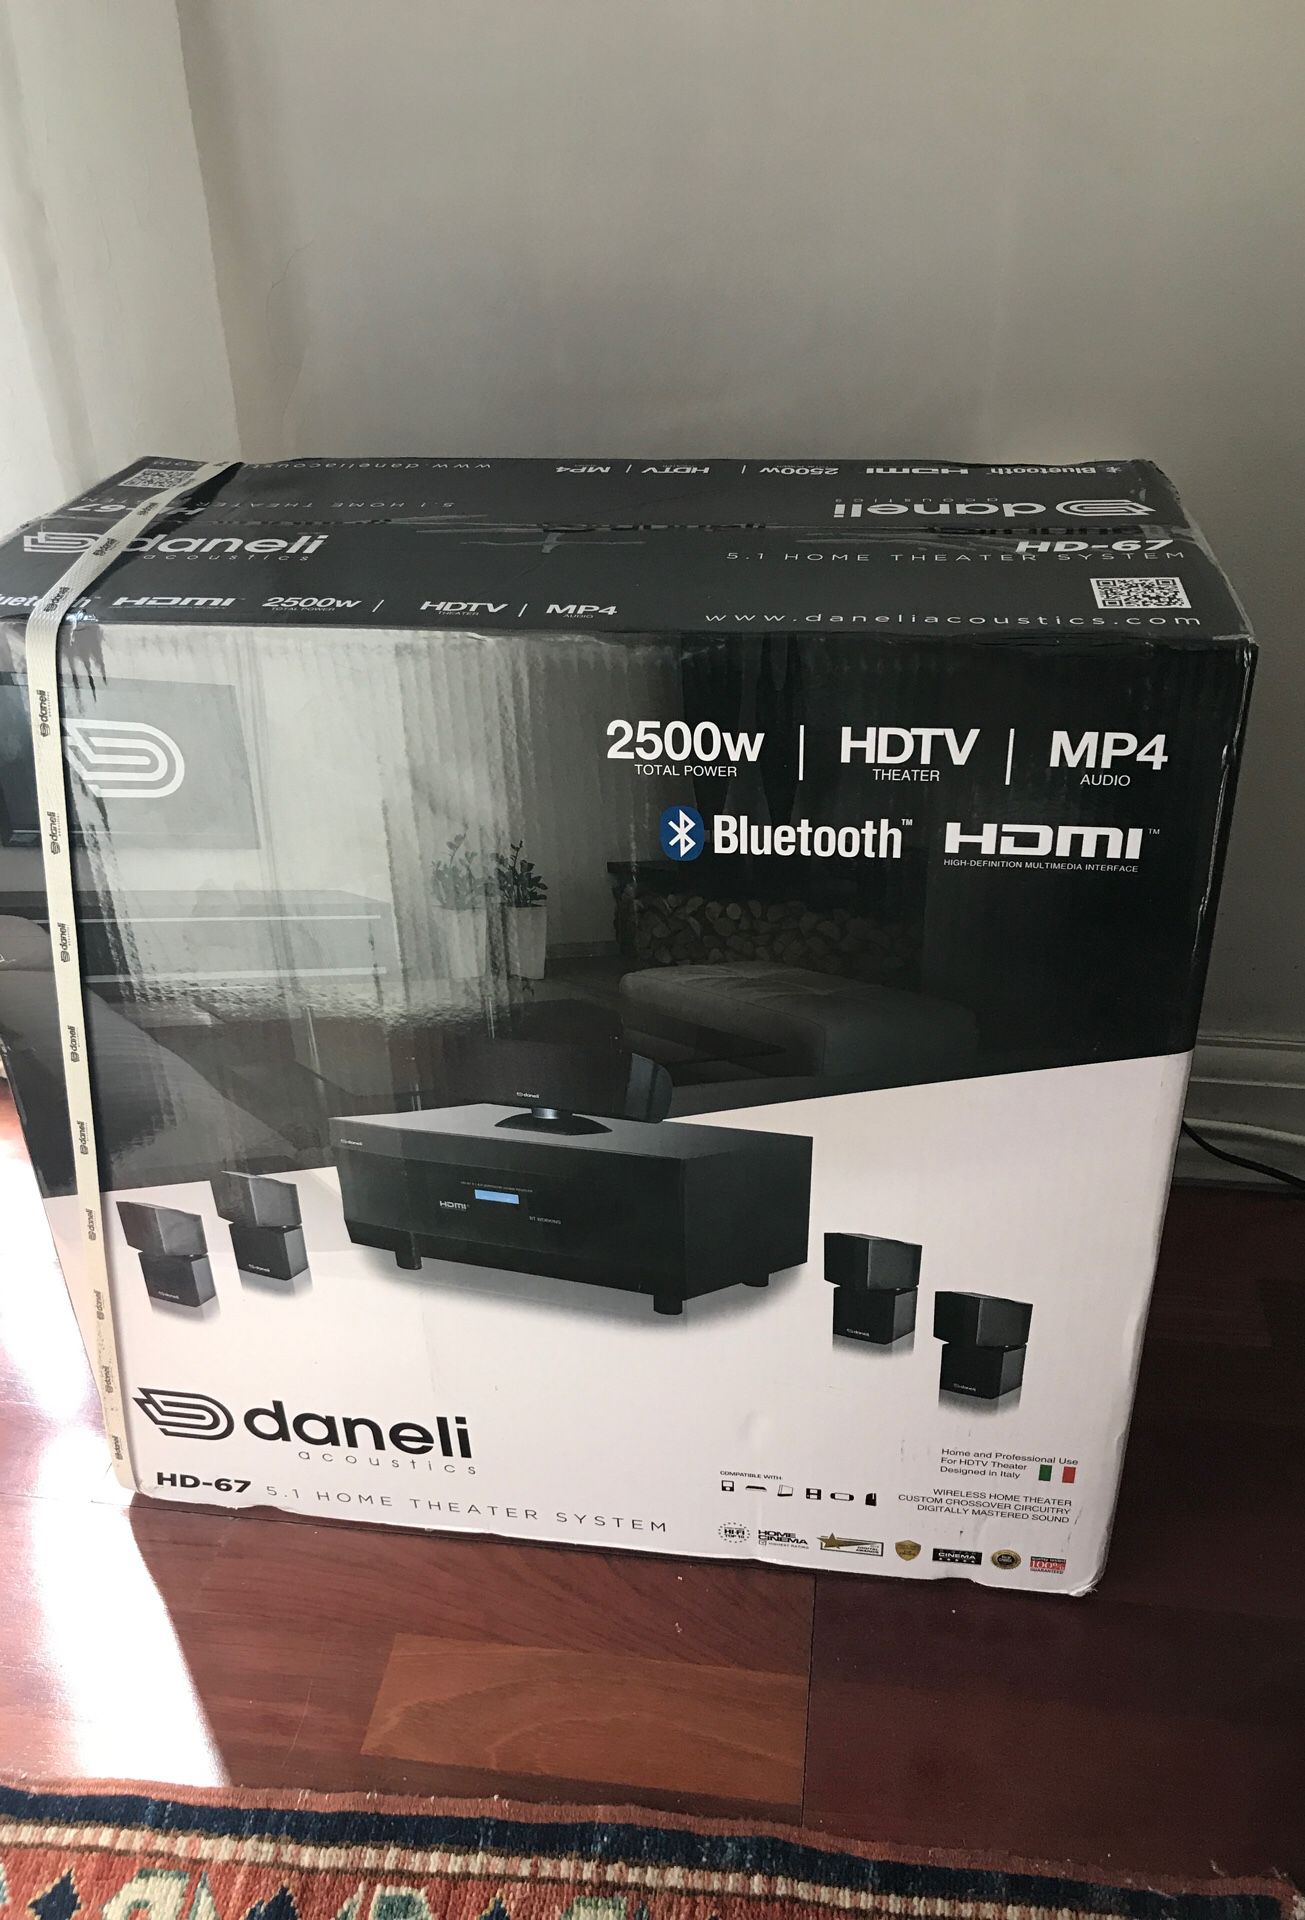 Daneli acoustic 5.1 home theater system HD-67 2500w/HDTV/MP4 Brand new on the box it goes for 2,000but sell it for 500 great deal!!!!